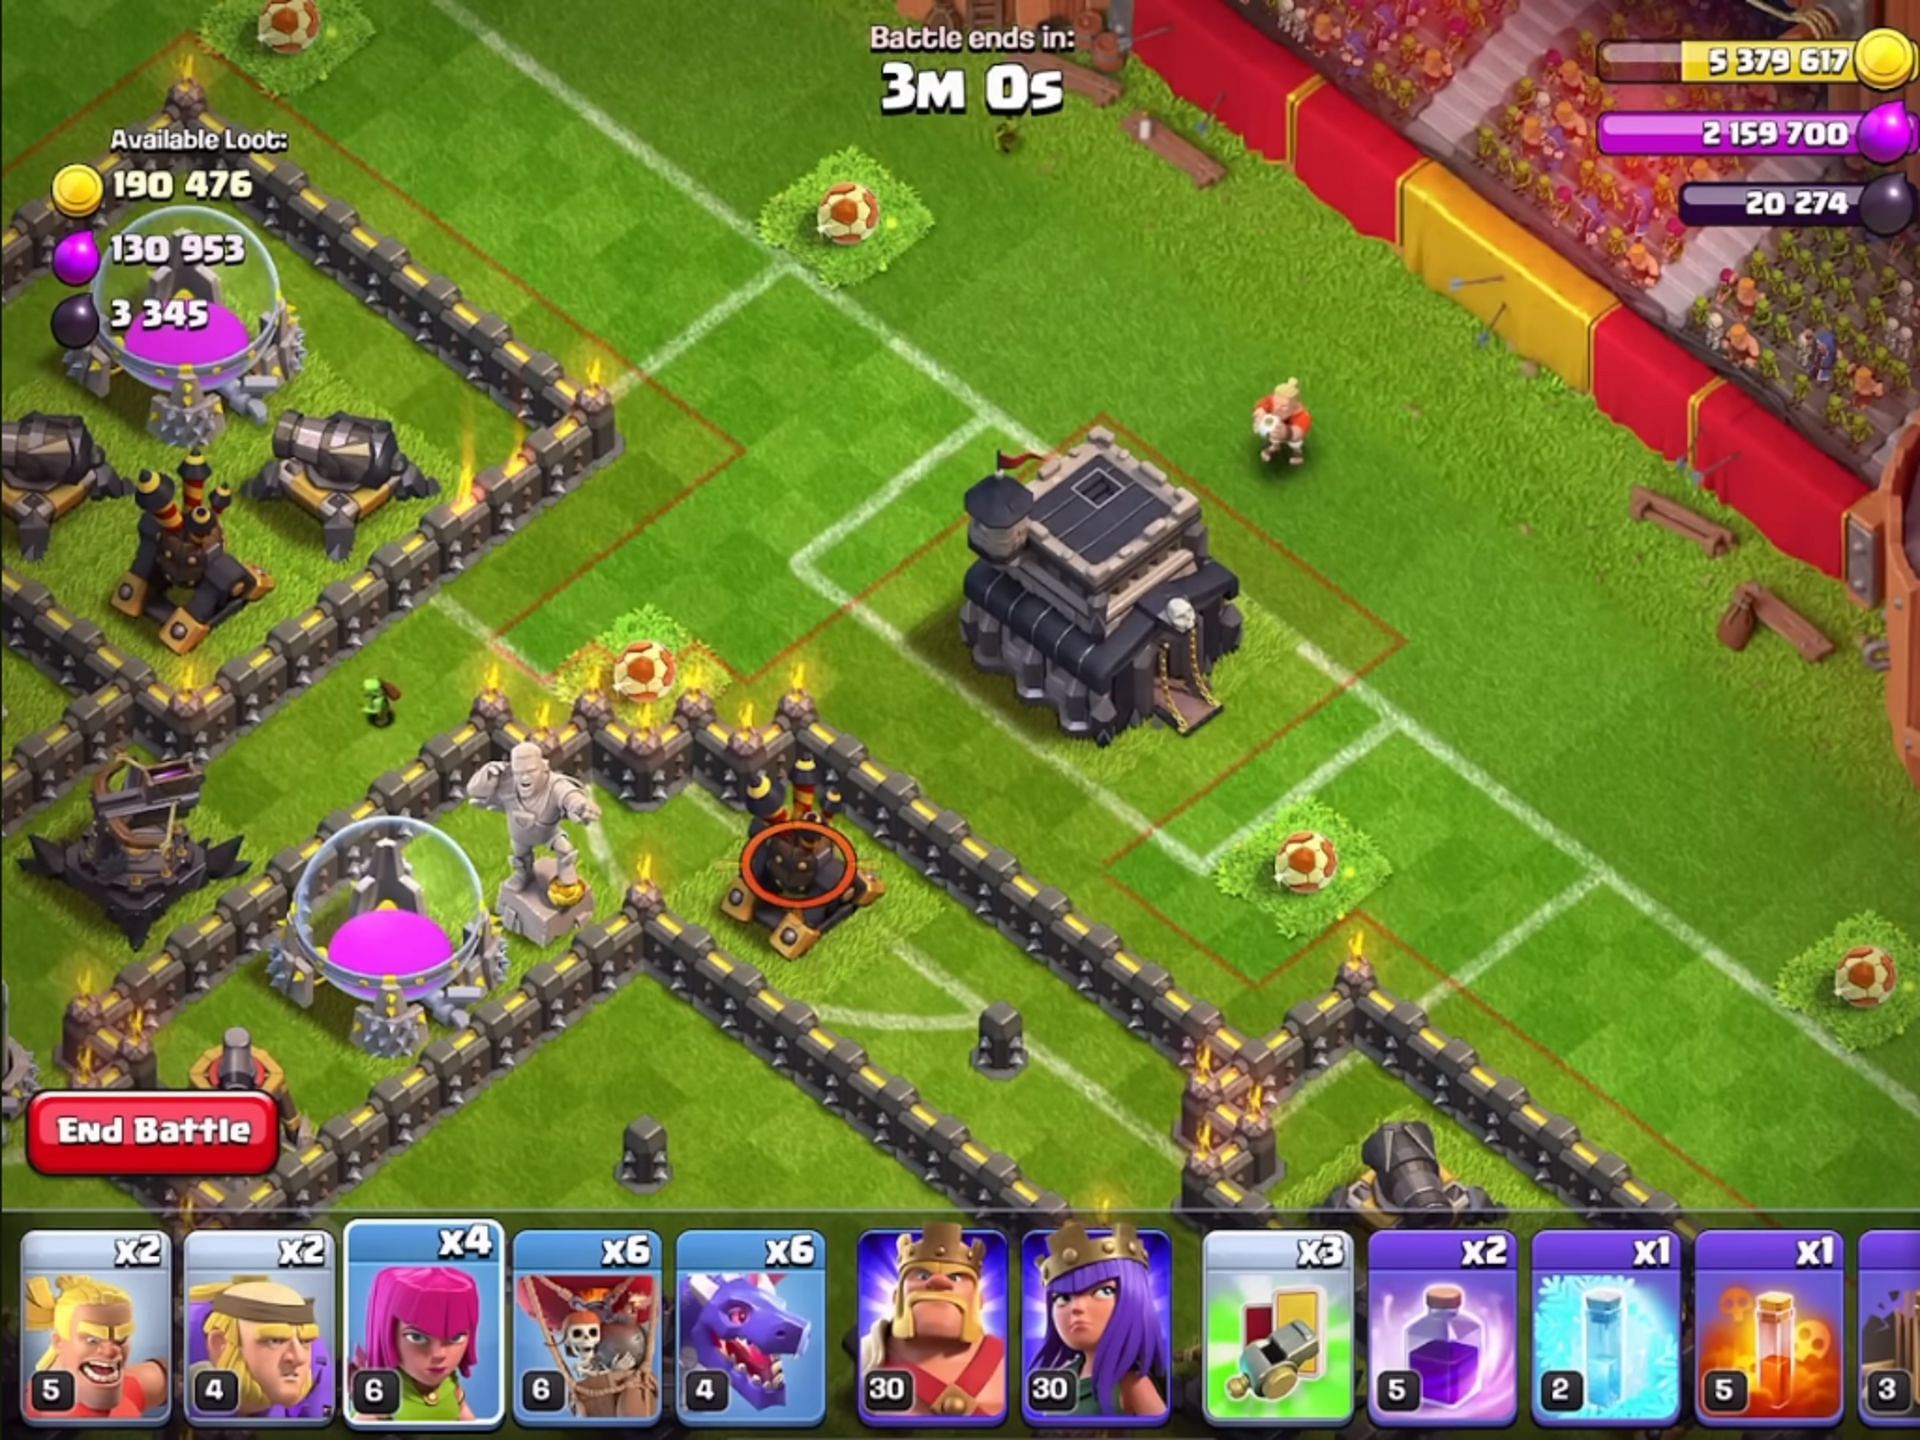 Barbarian Kicker placement (Image via Supercell)